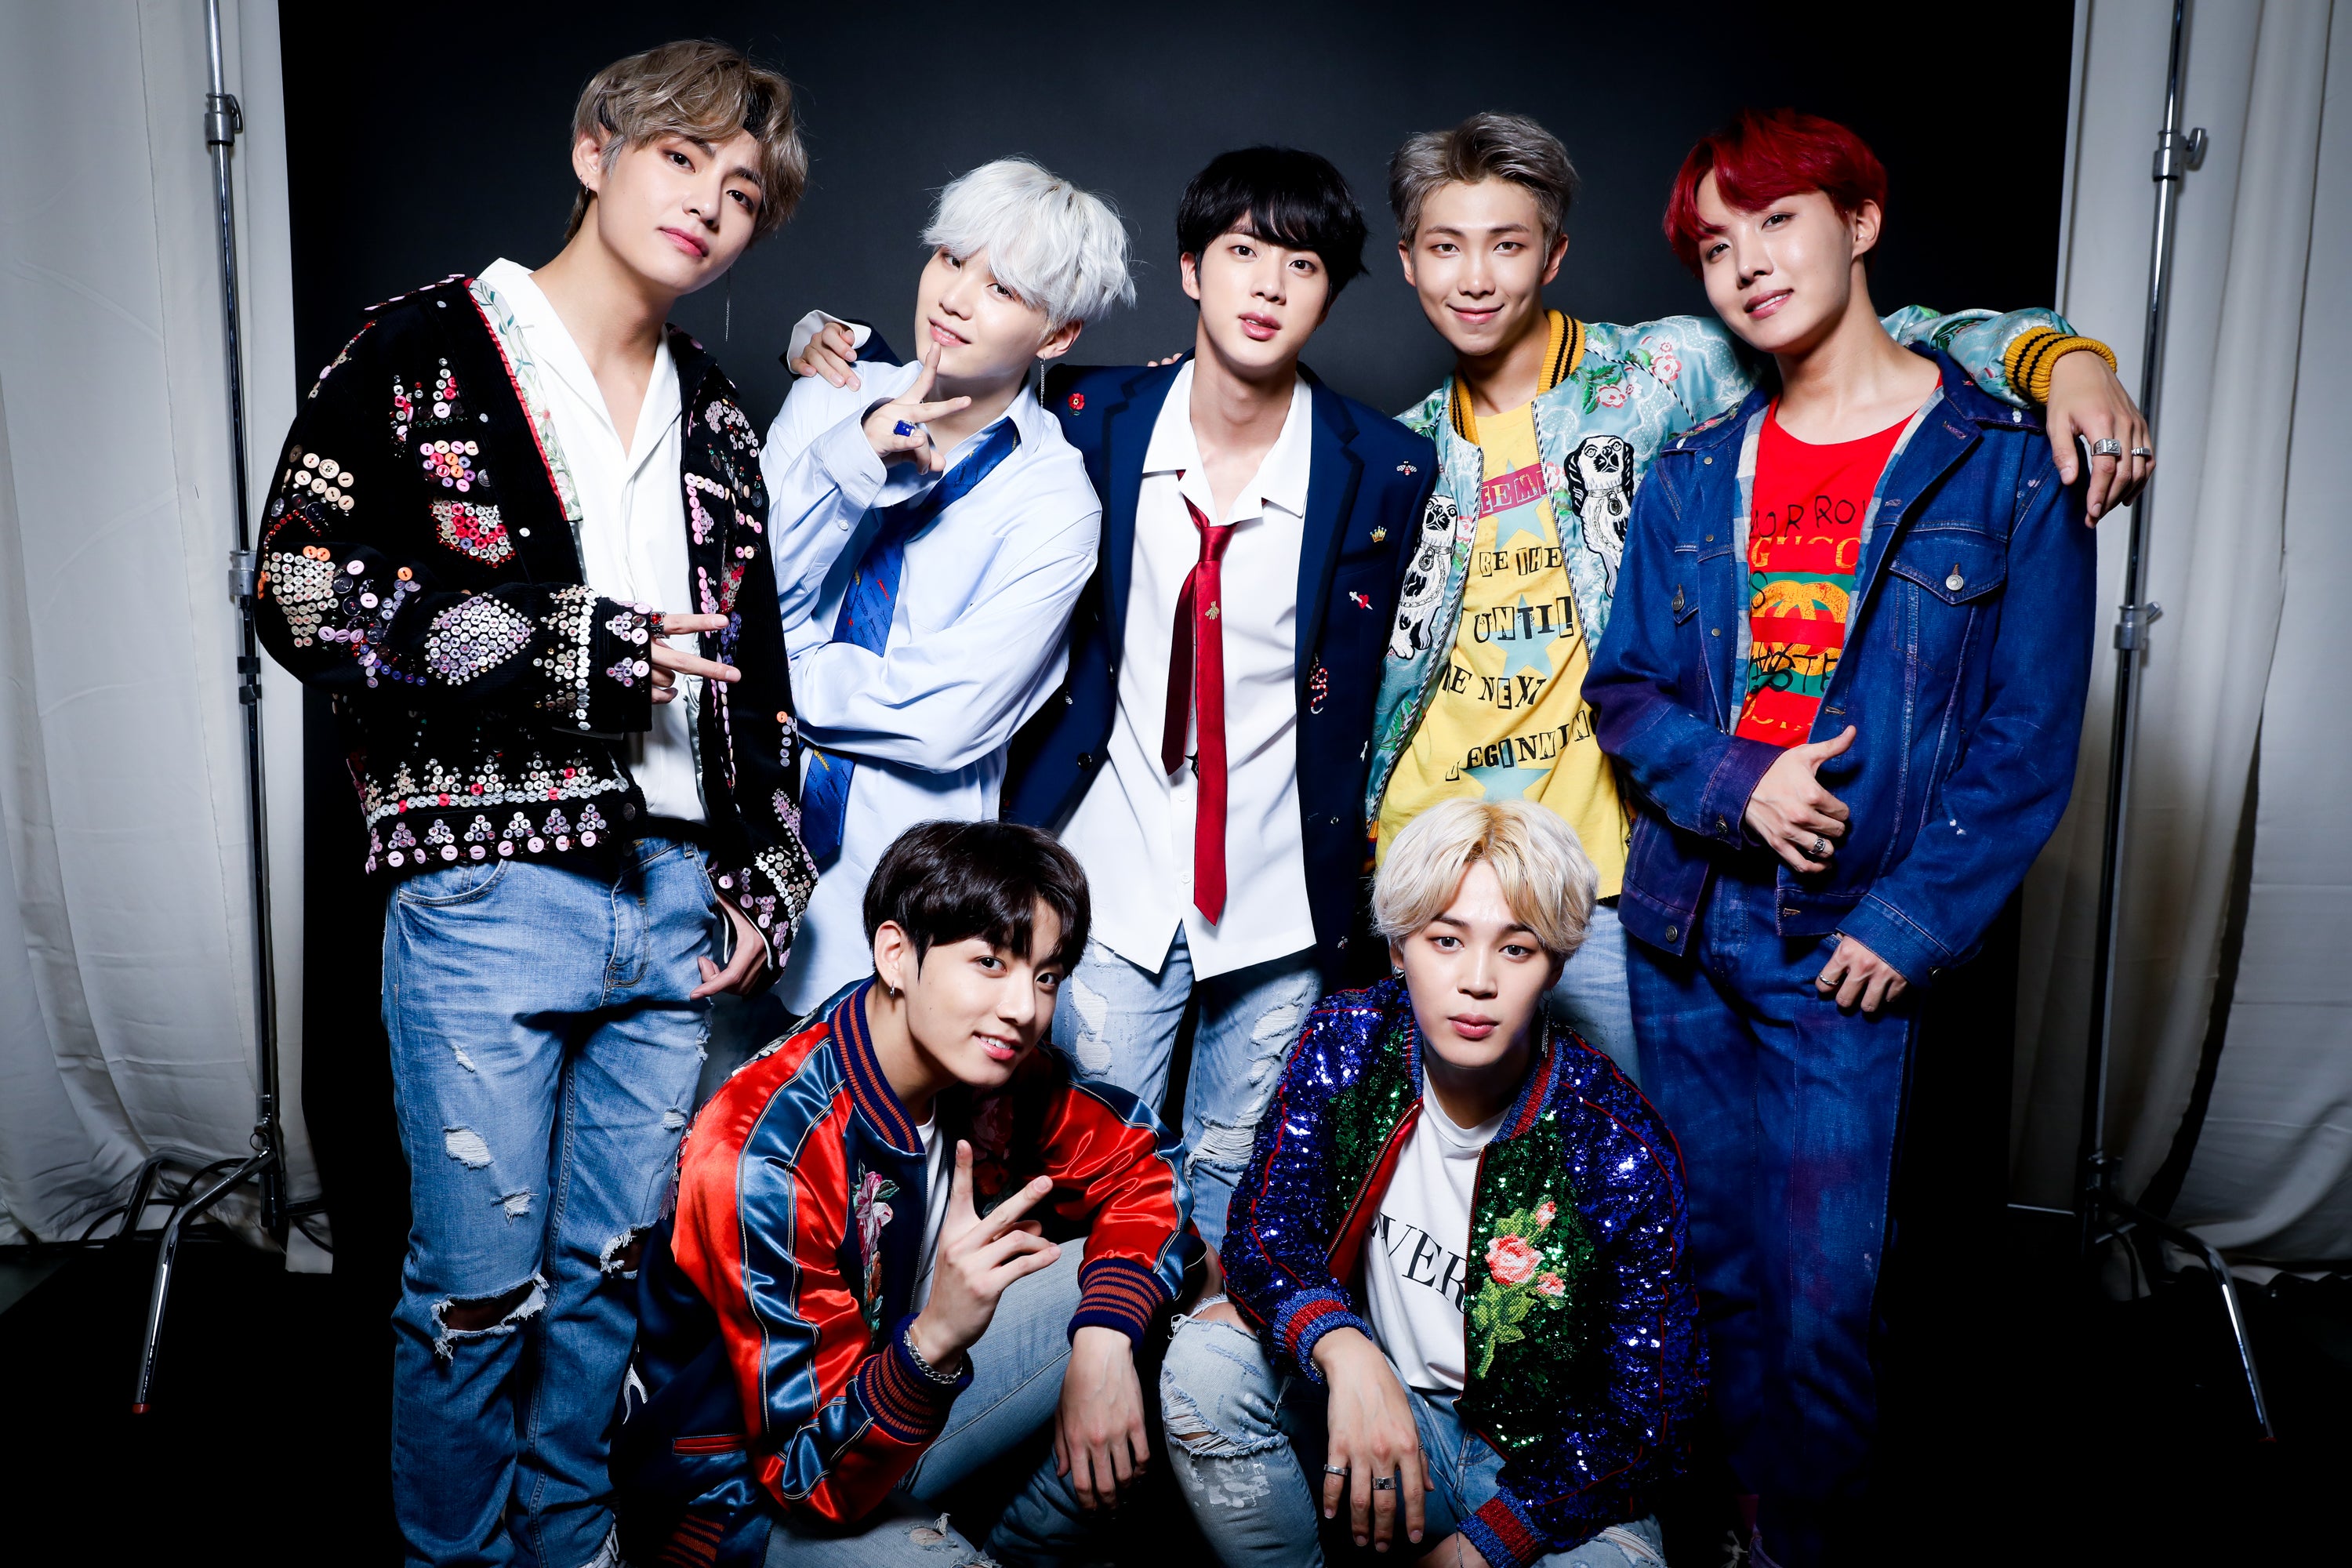 K-pop boy band BTS and Puma to launch first collection in US